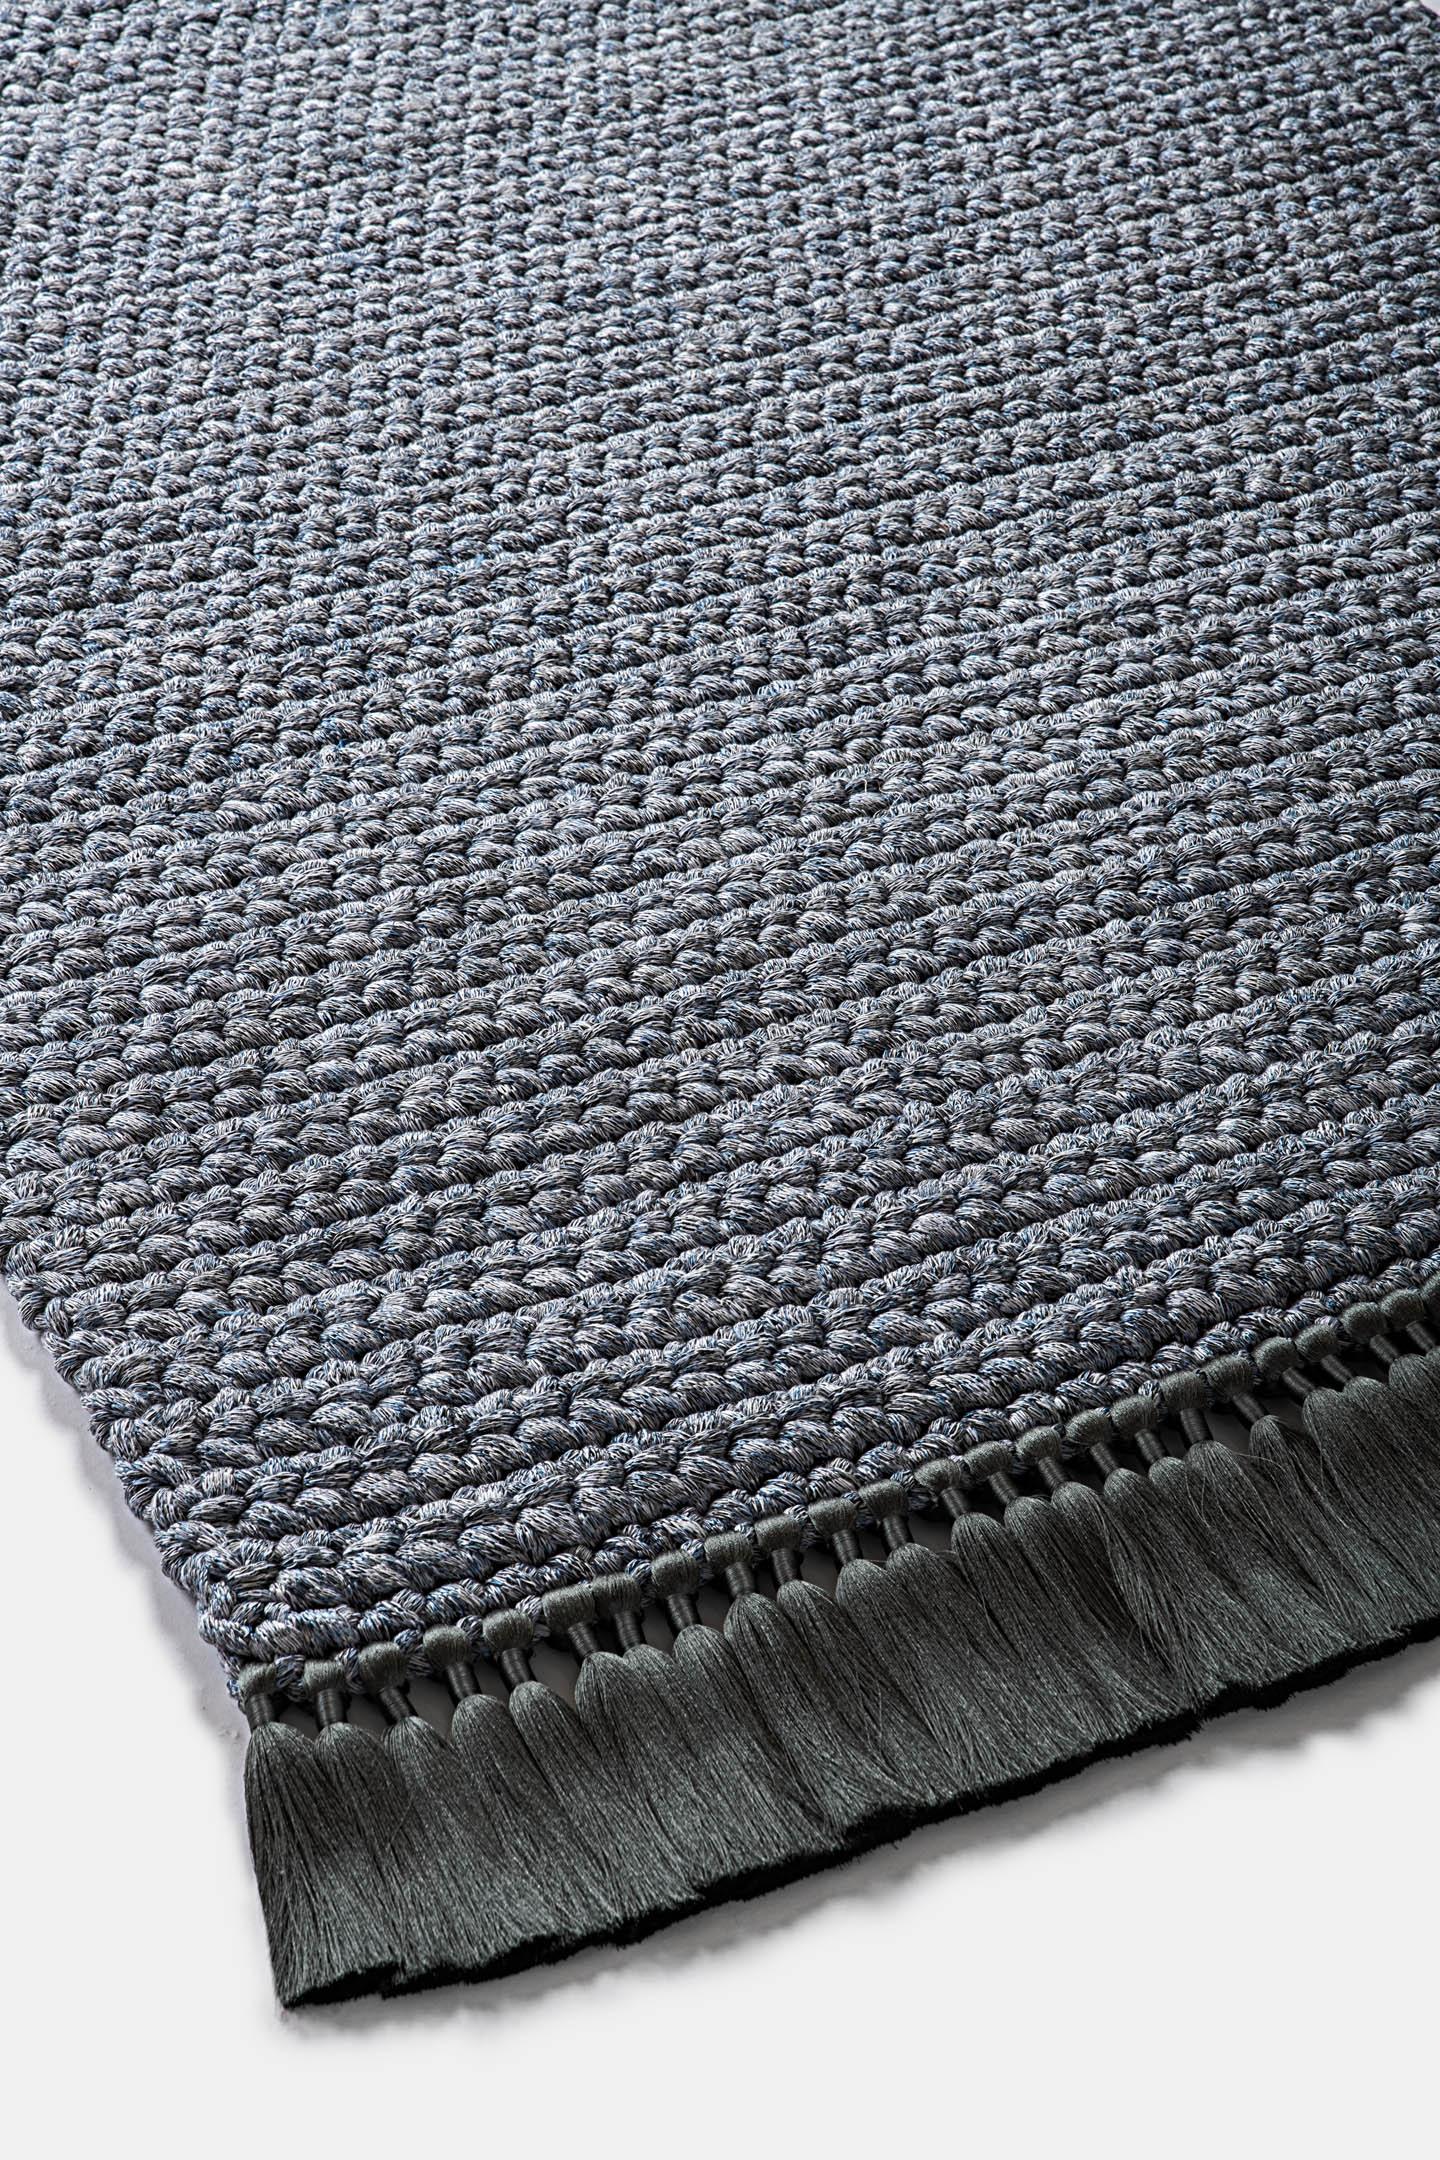 Handmade Crochet Thick Rug in Blue Grey Made of Cotton & Polyester by Iota For Sale 1